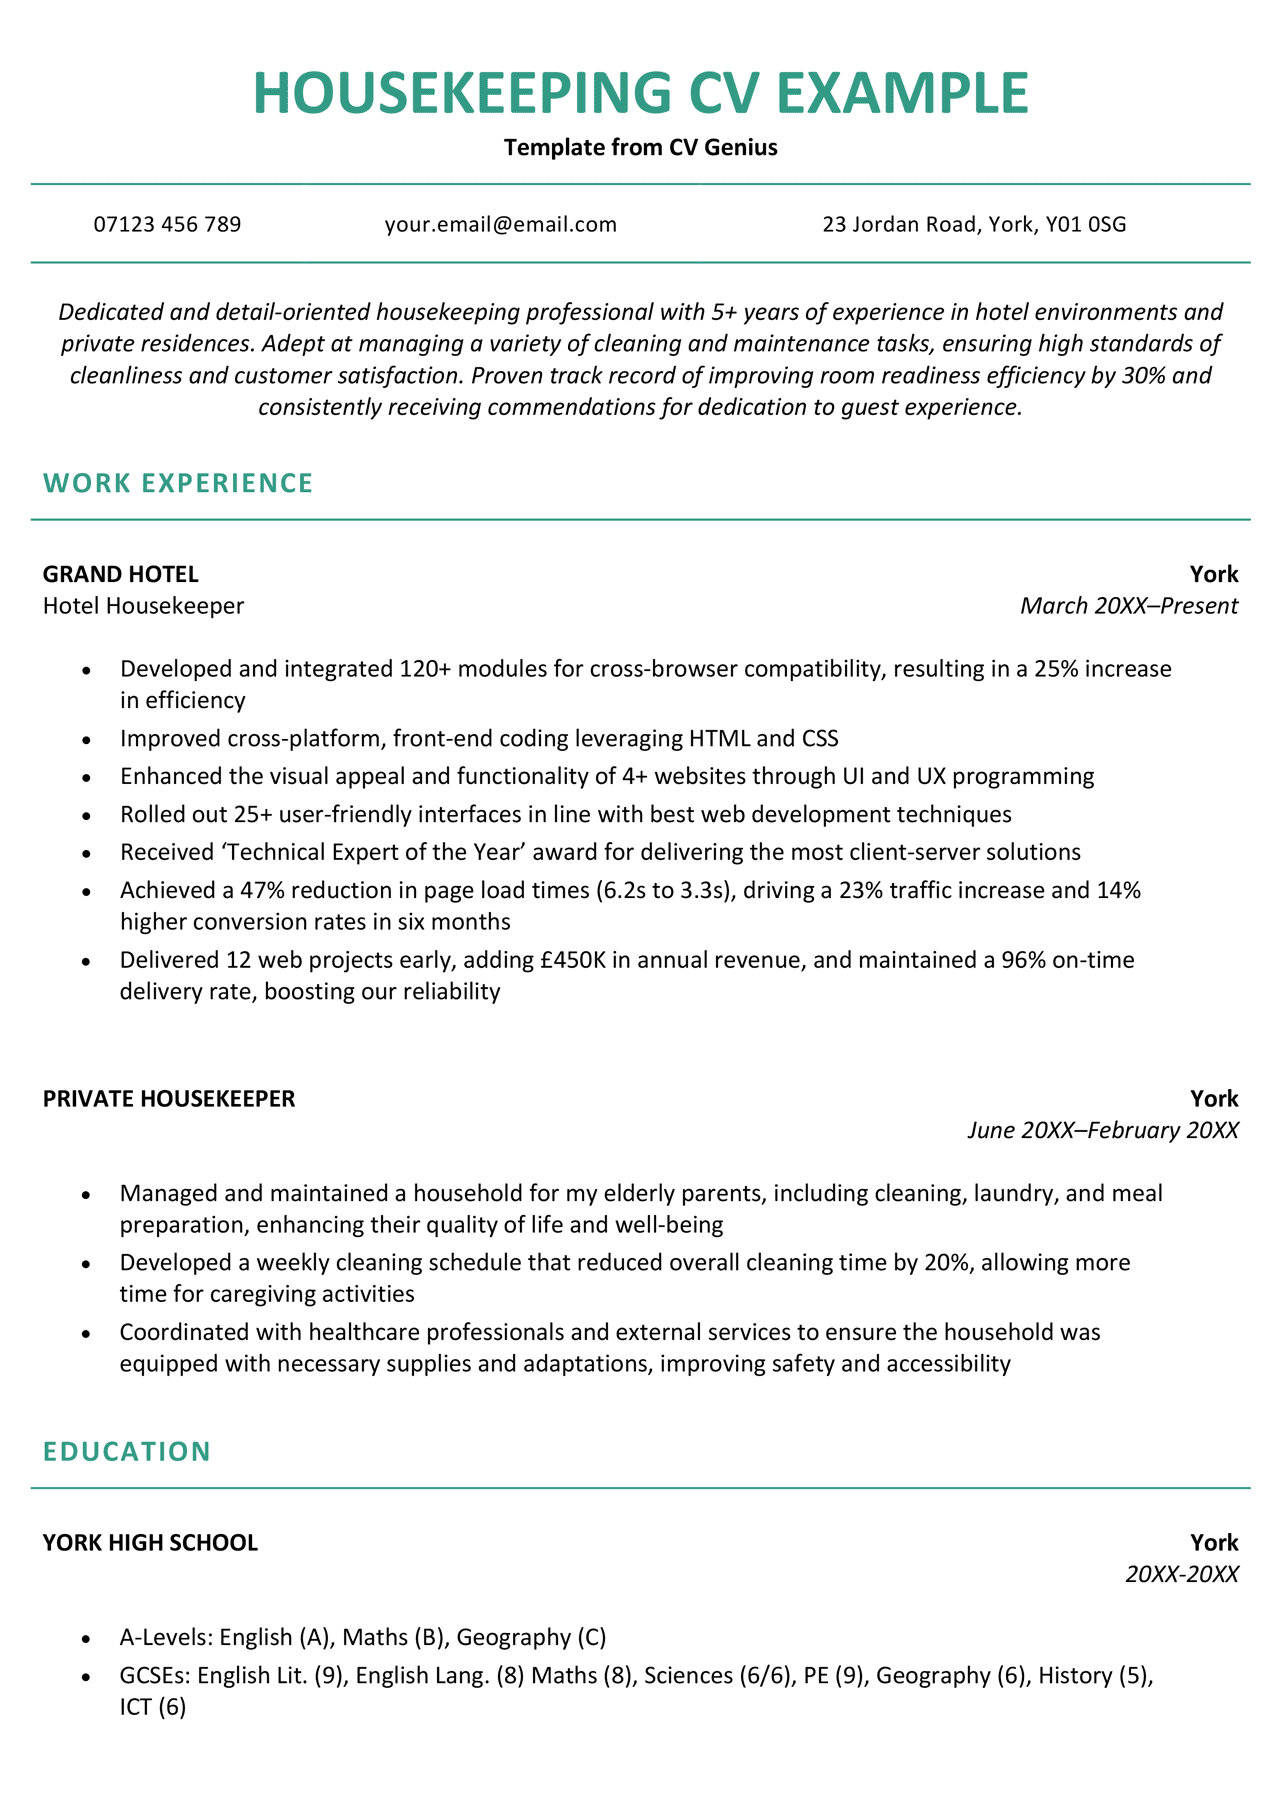 A housekeeping CV example with green header text and information neatly organised in a paragraph and several lists.